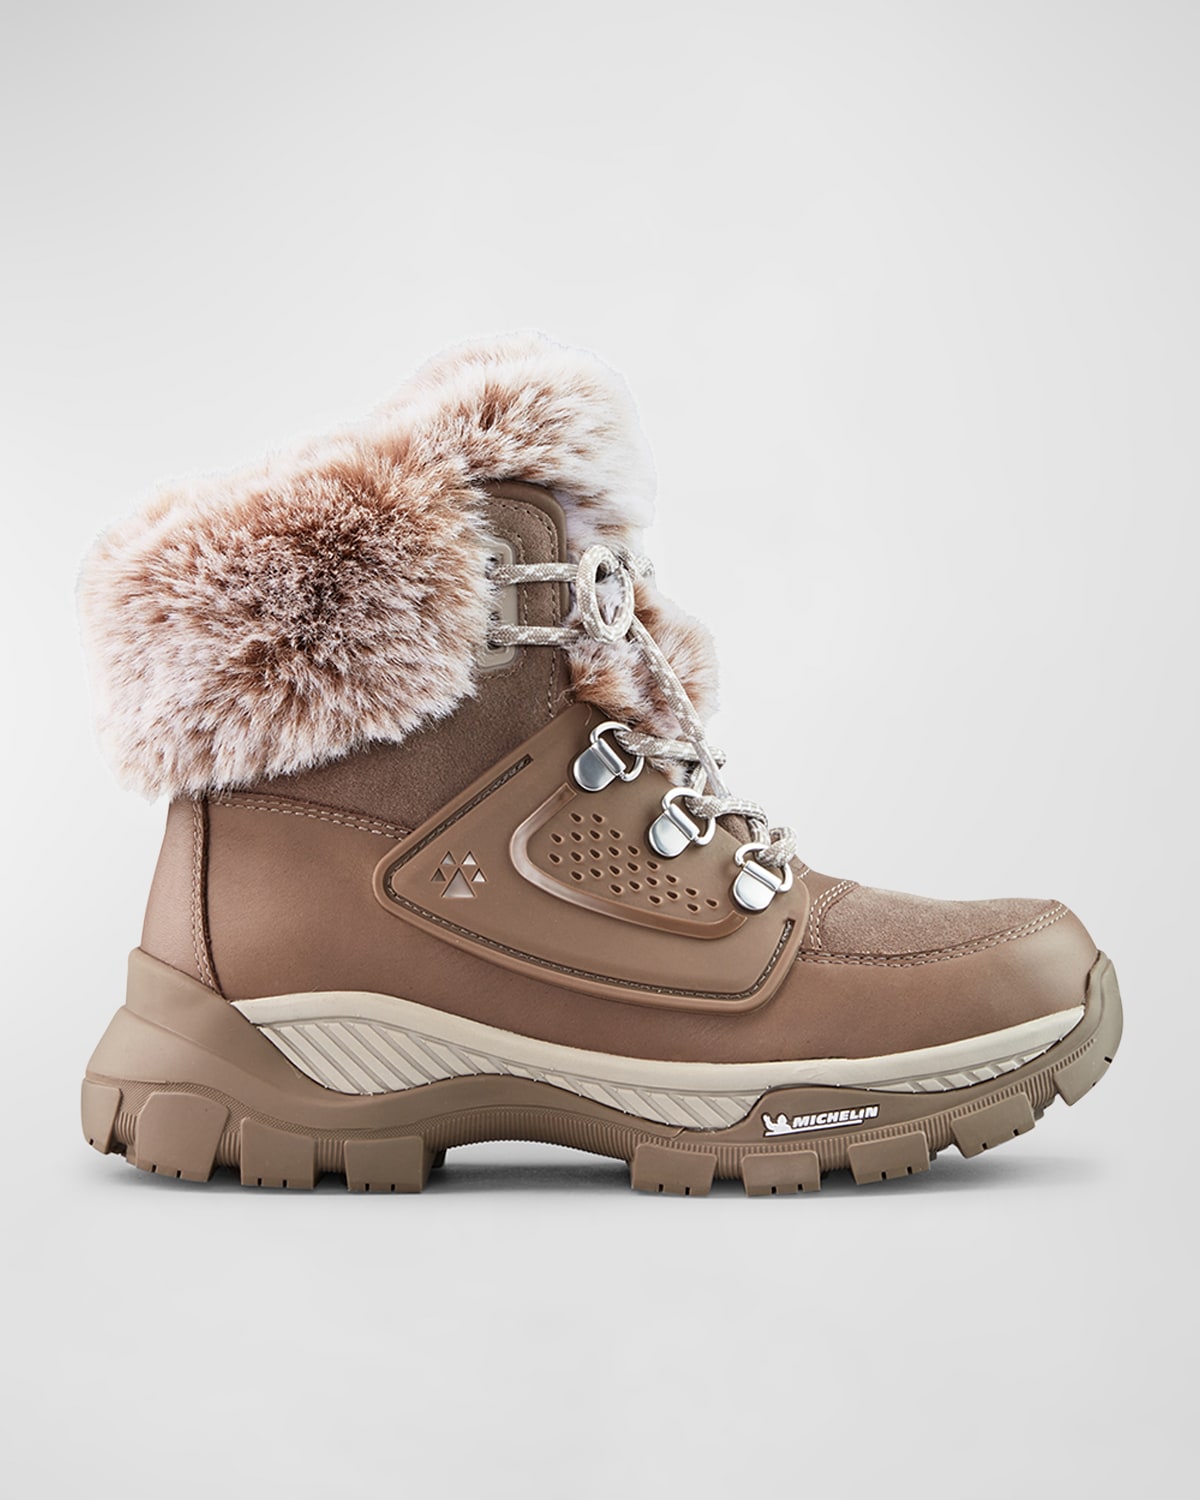 Union Leather Faux Fur Hiker Booties